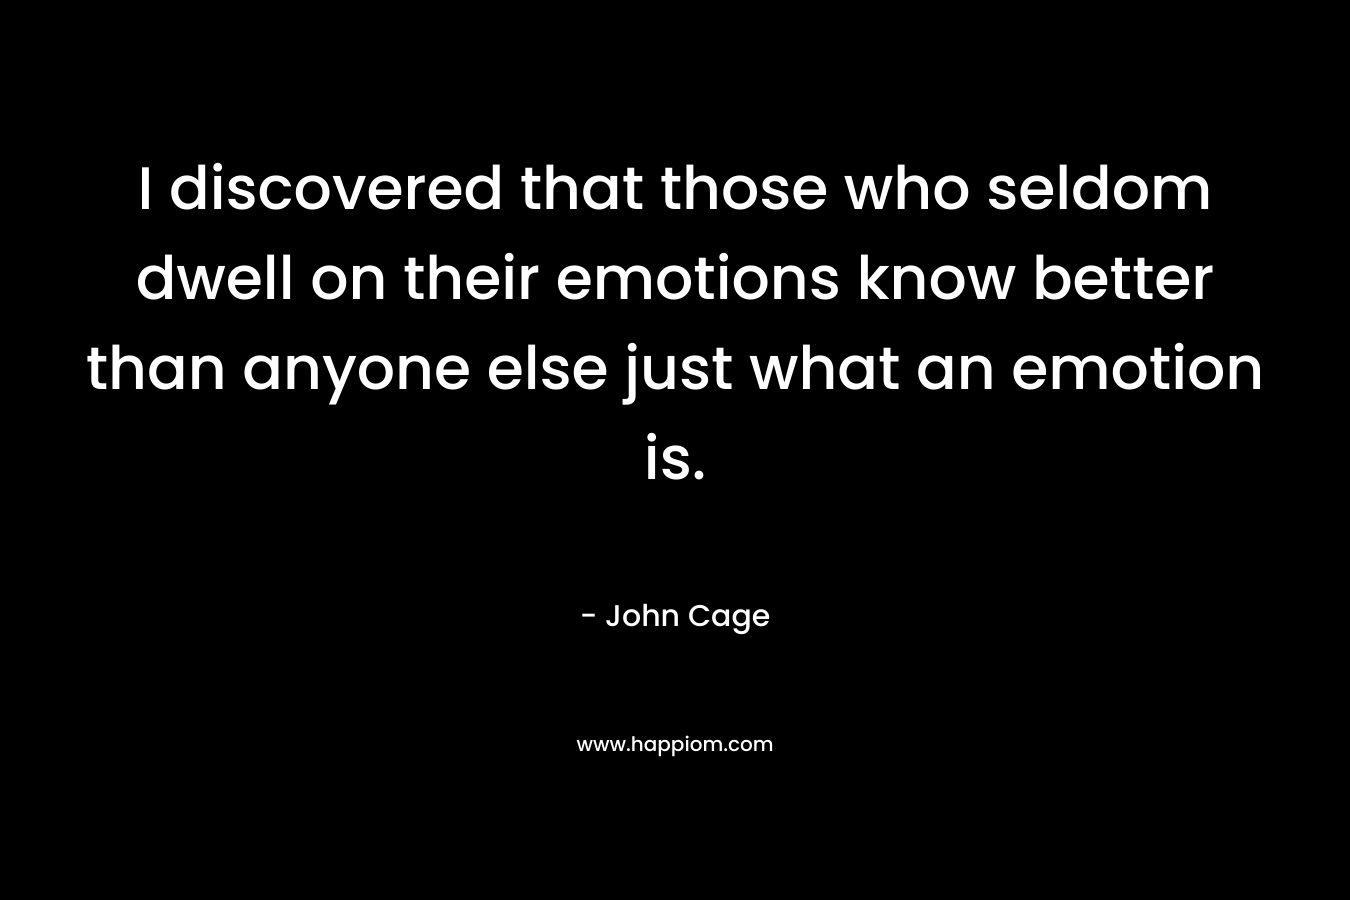 I discovered that those who seldom dwell on their emotions know better than anyone else just what an emotion is. – John Cage